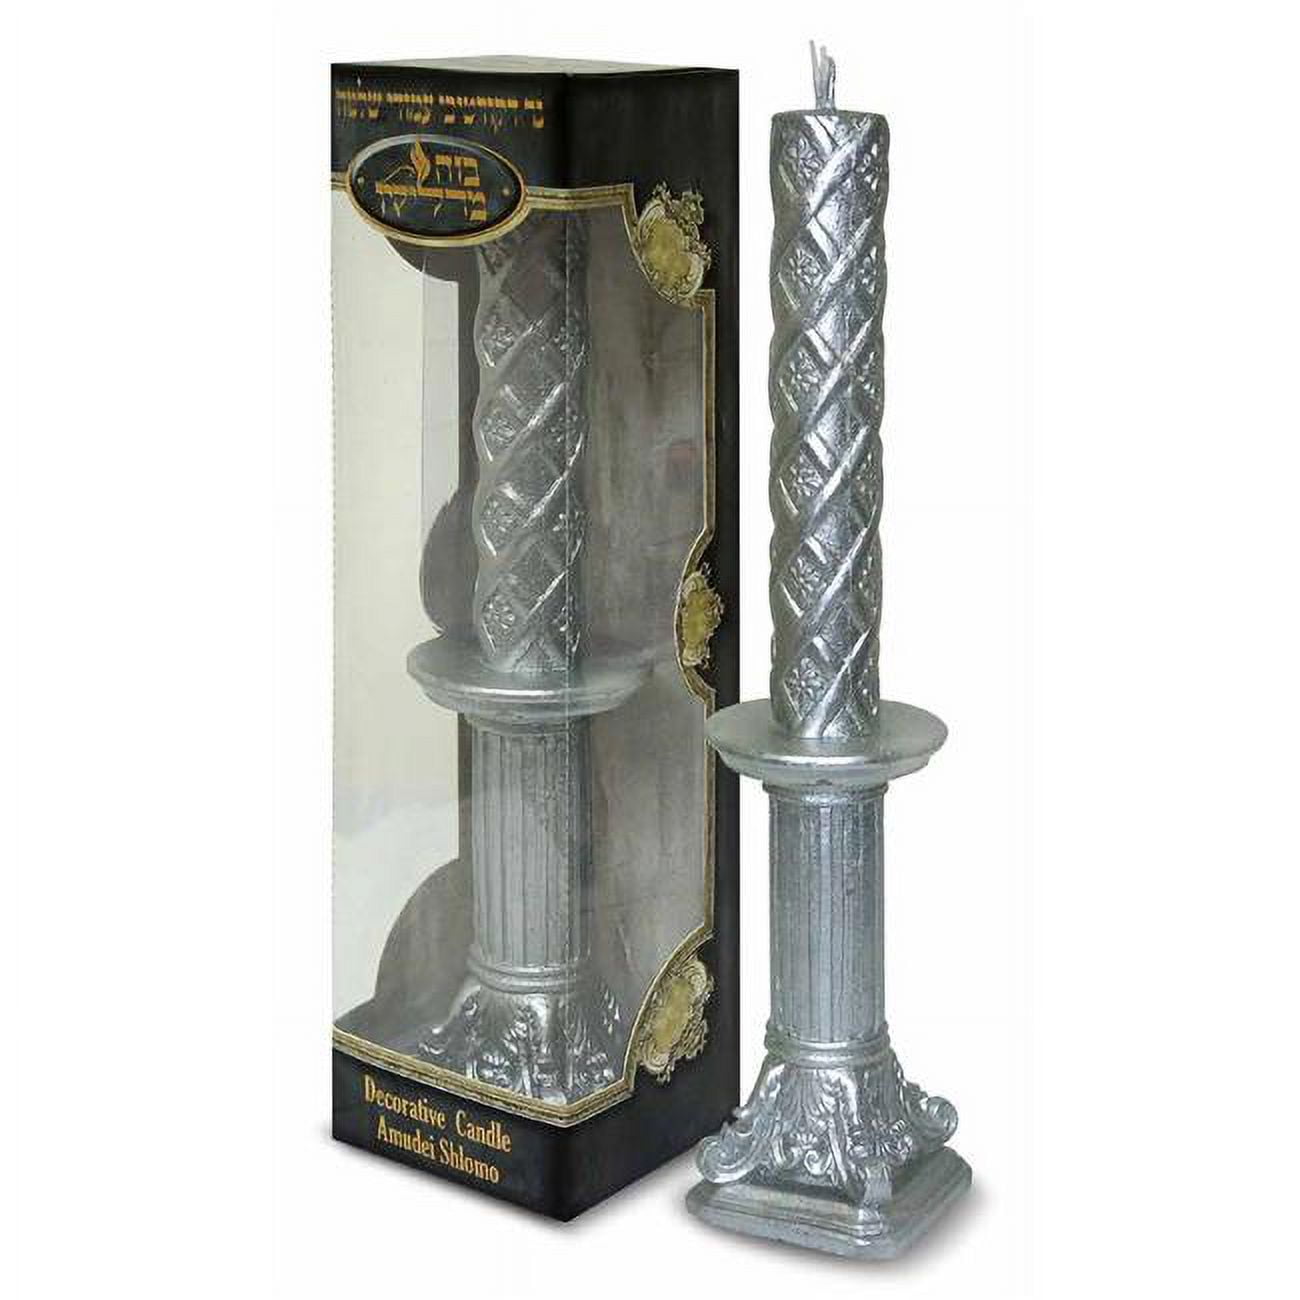 Picture of Bazeh Madlukin 71118C 2.5 x 2.5 x 11 in. Decorative Havdalah Candle with Amudei Shlomo Silver On Silver Pole